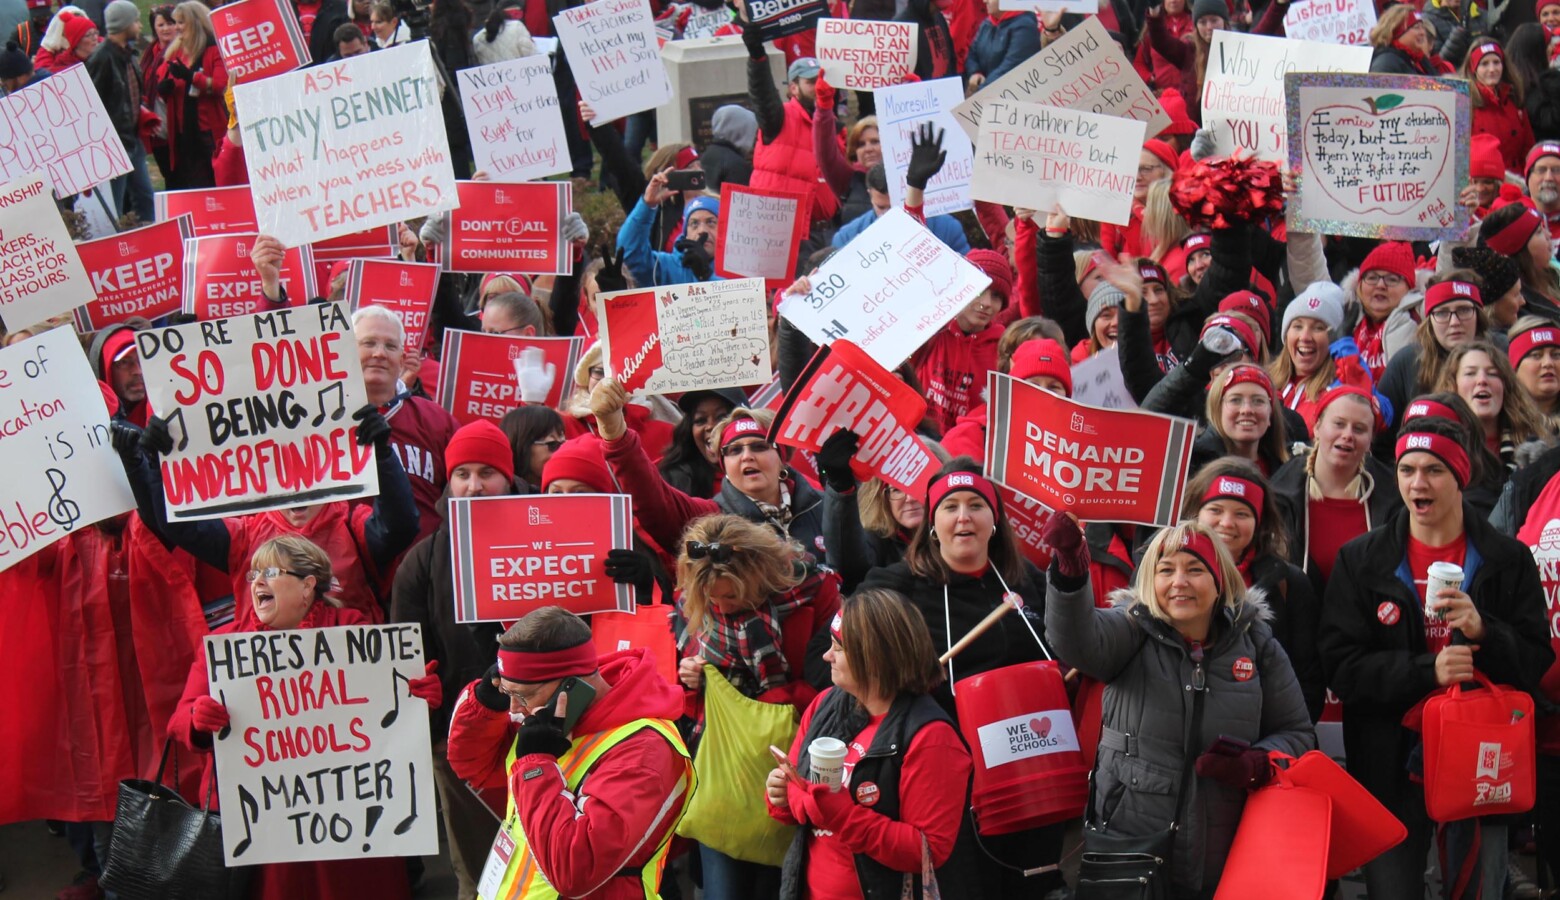 Thousands of educators and public education supporters flooded the statehouse lawn in November 2019, to demand additional funding for schools and teacher compensation. (Lauren Chapman/IPB News)